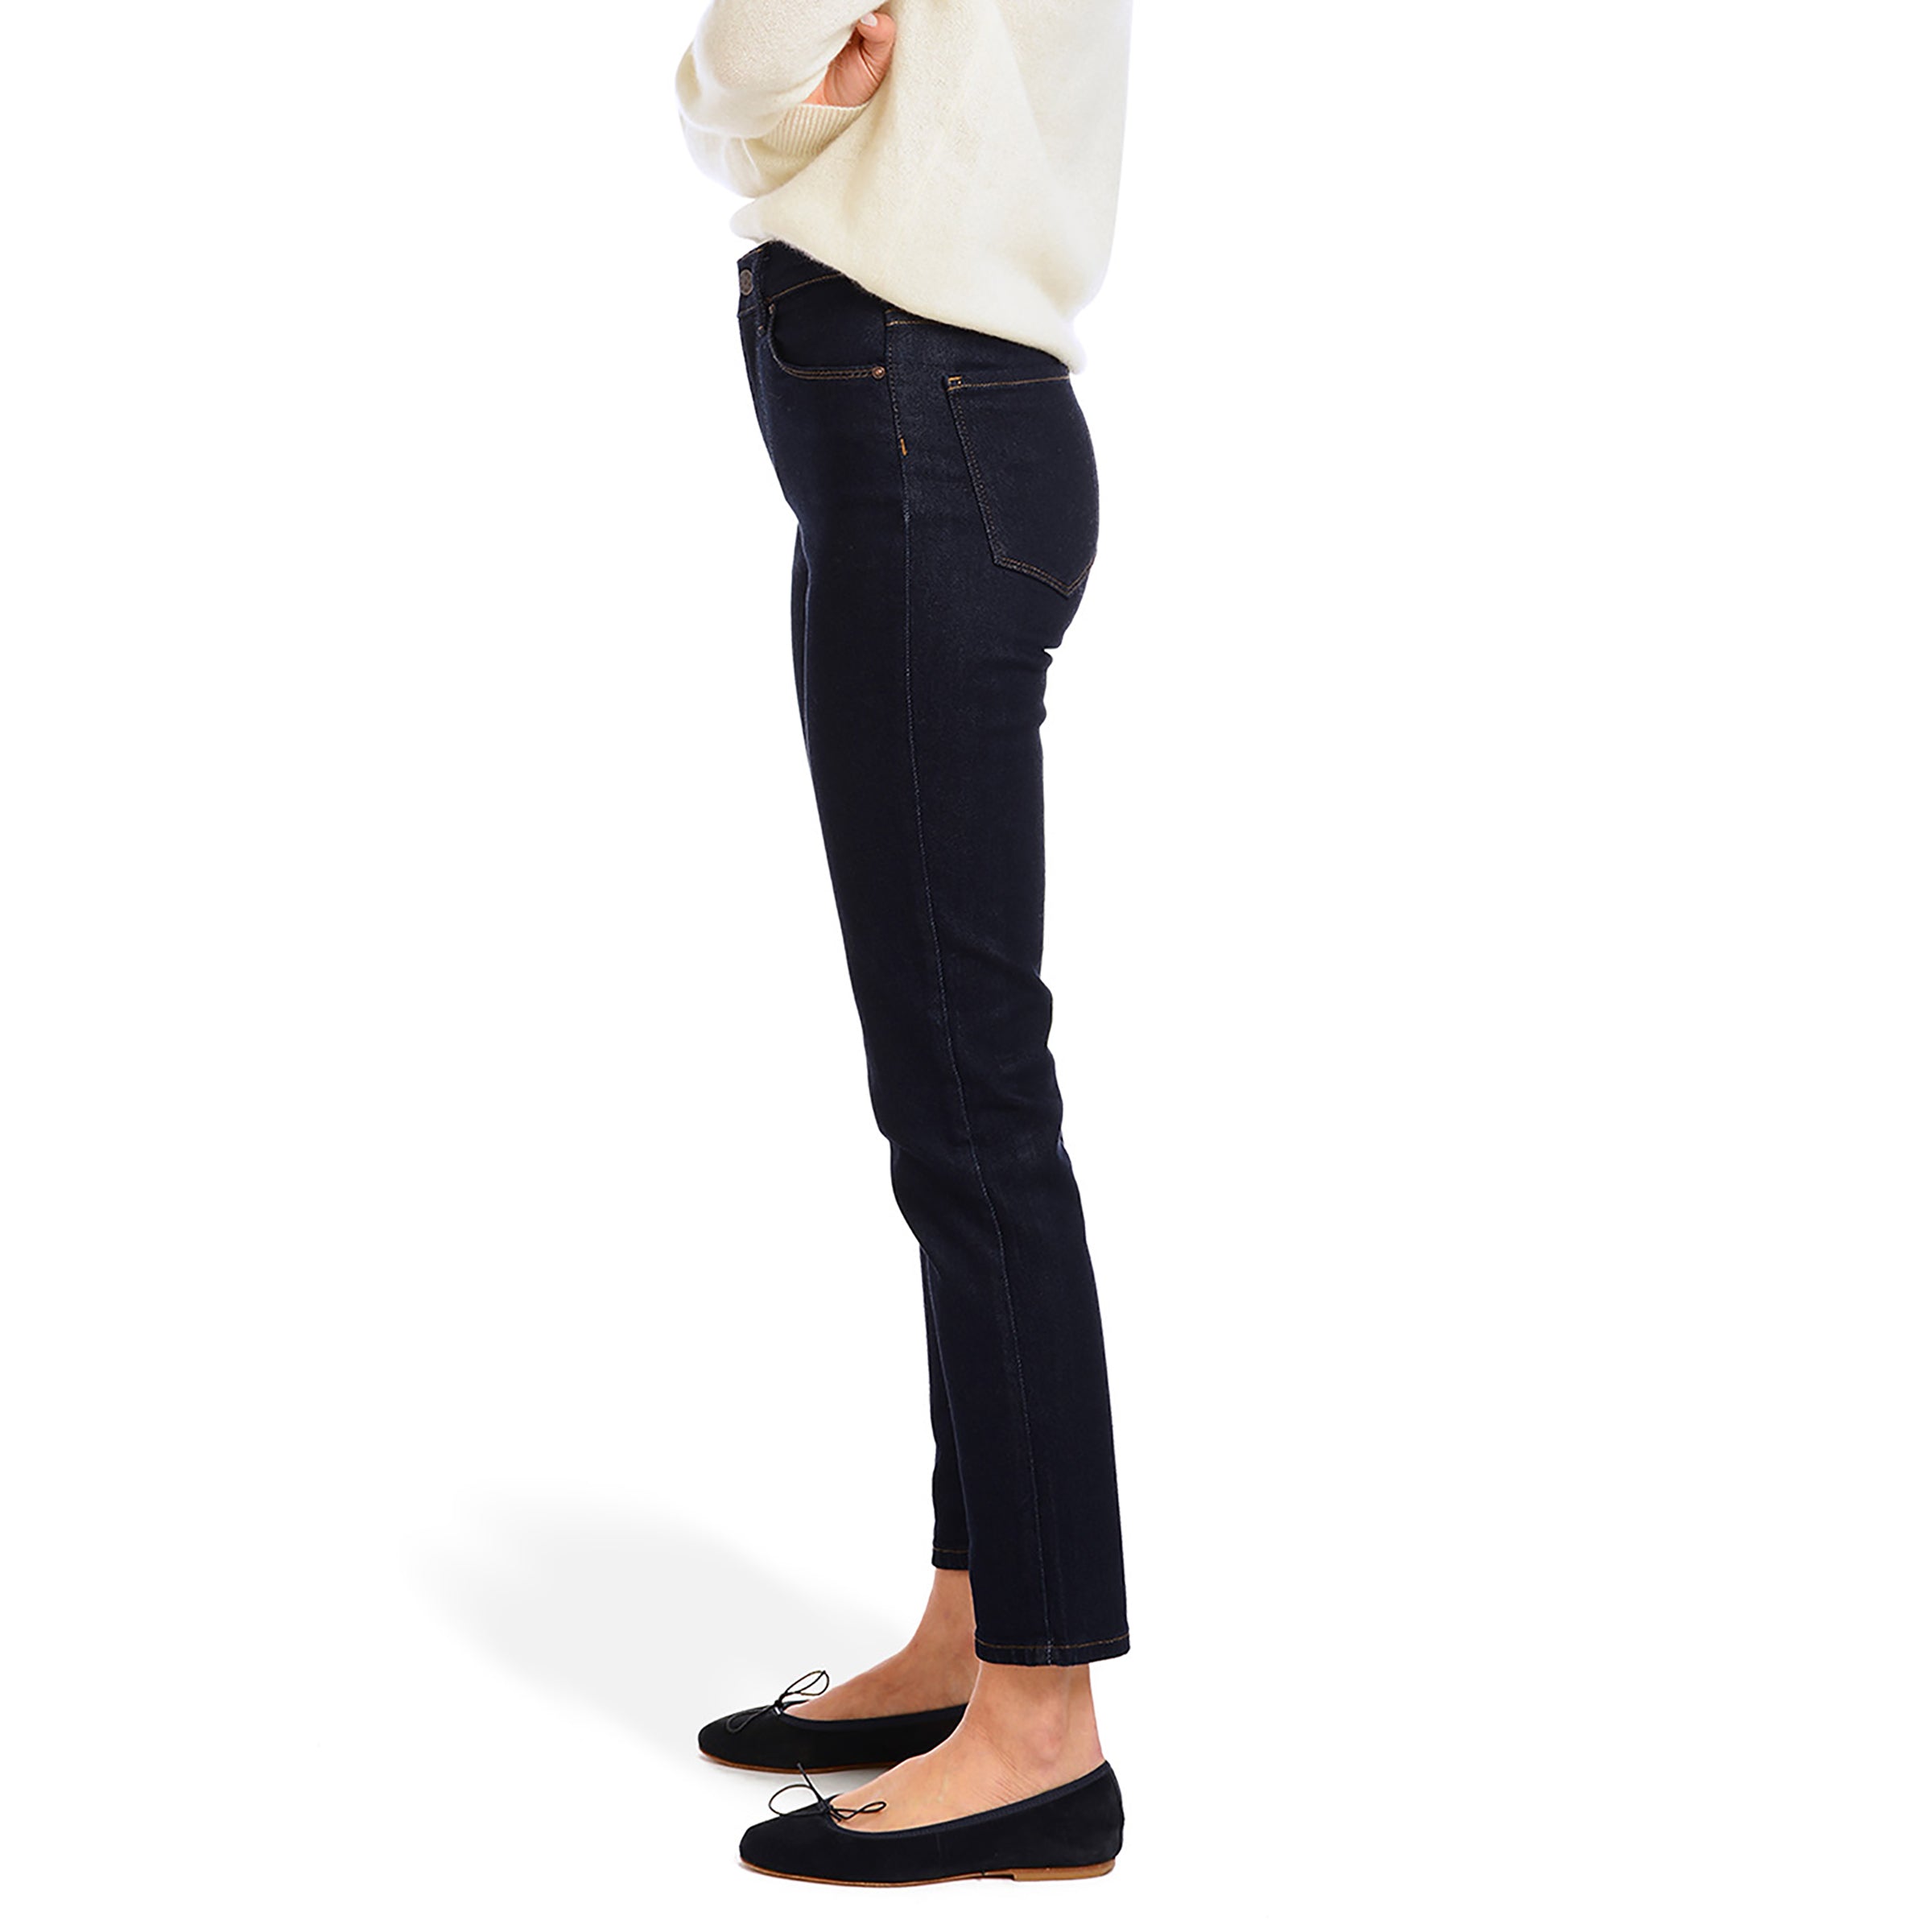 Women wearing Azul oscuro Mom Oliver Jeans